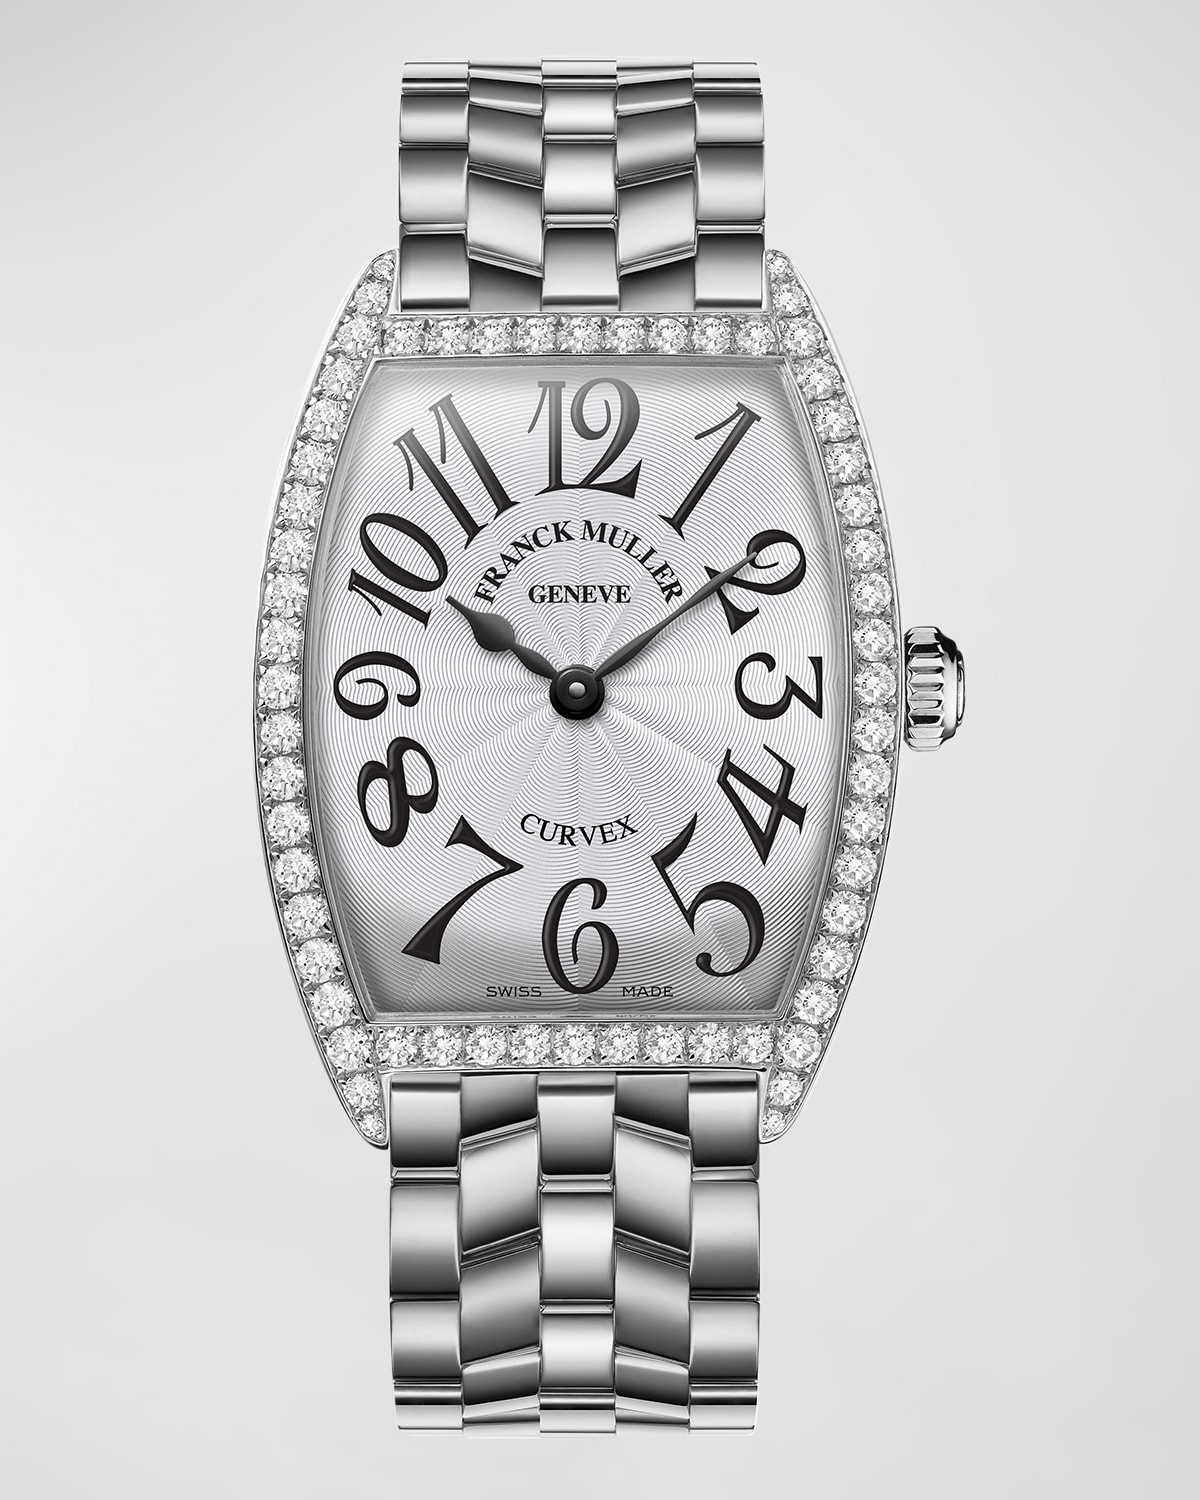 Franck Muller Men's Cintree Curvex Stainless Steel Diamond Watch With Bracelet Strap In White